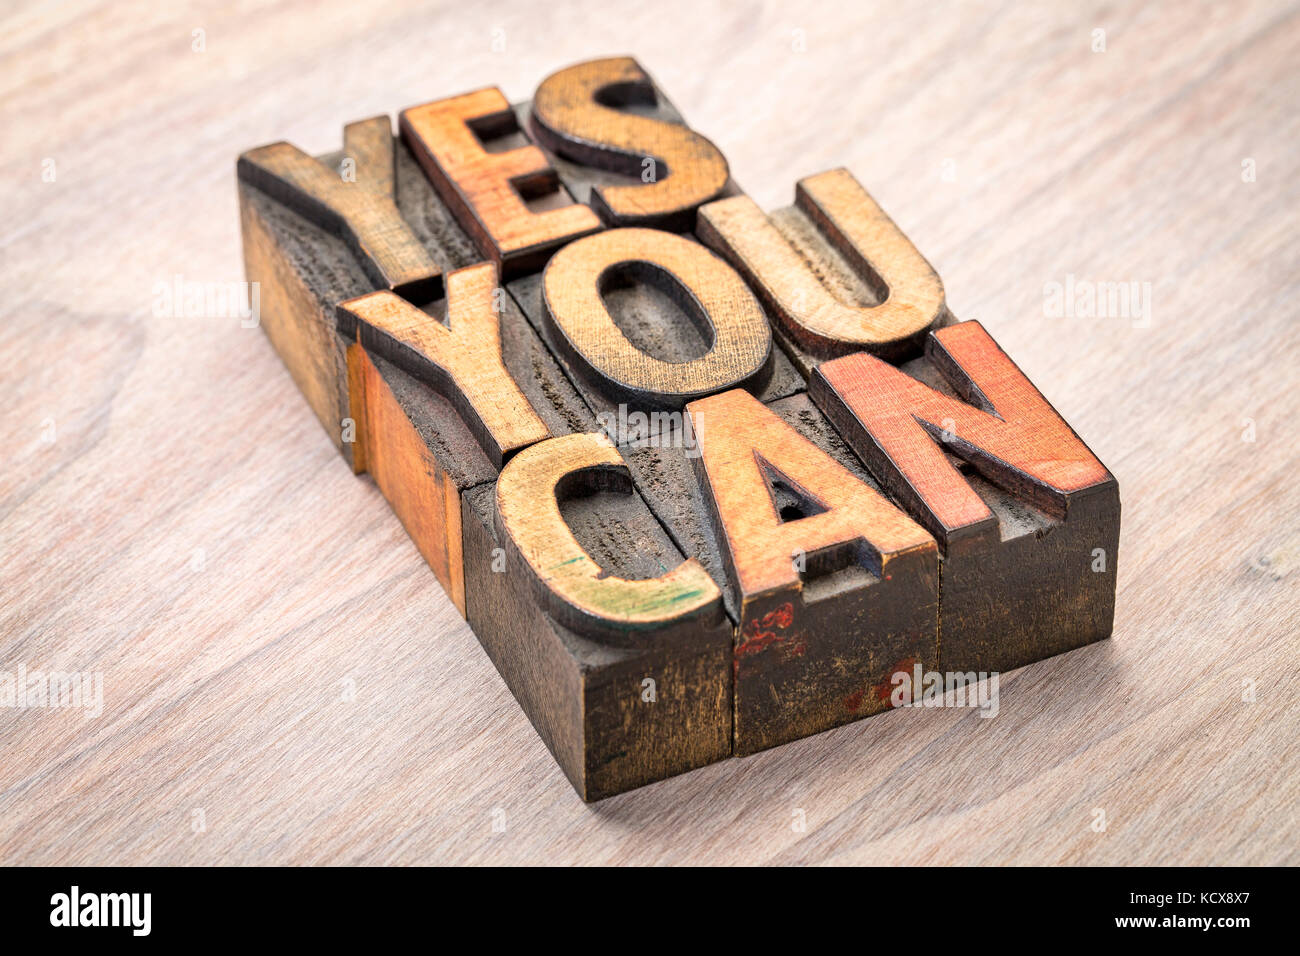 yes, you can - motivational quote abstract in vintage letterpress wood type blocks Stock Photo